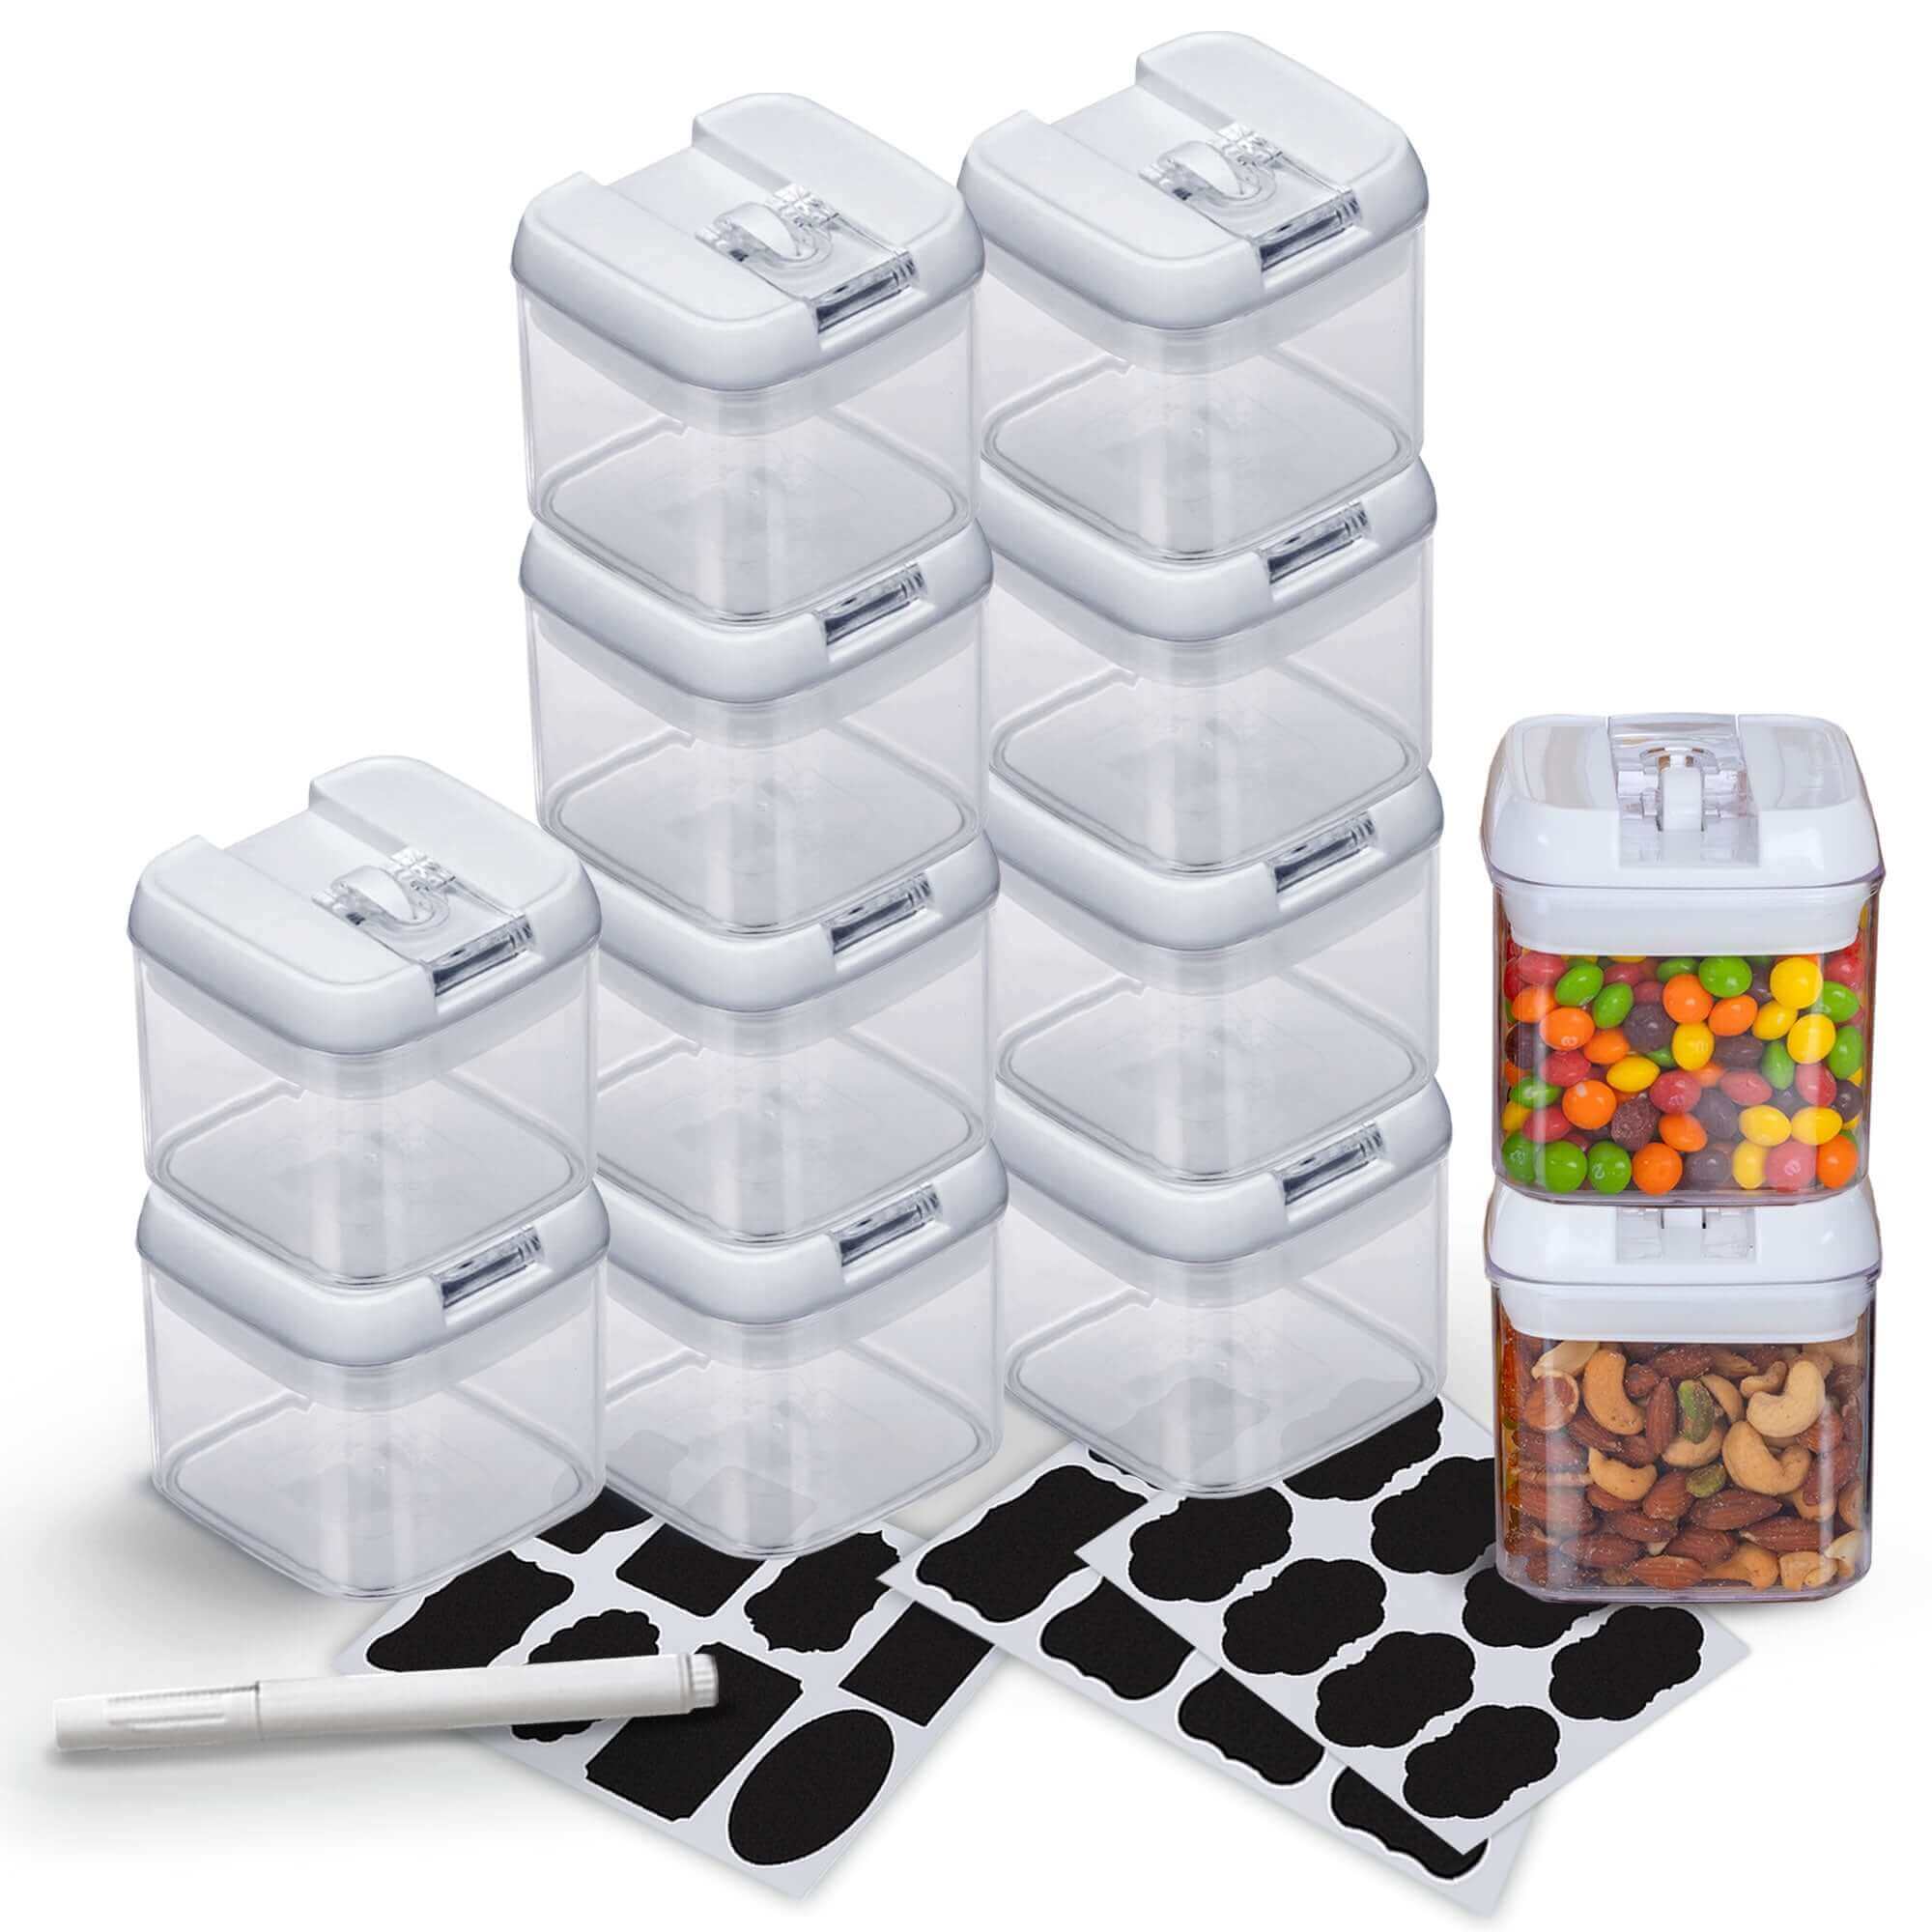 Cheer Collection Set of 7 Airtight Food Storage Containers - Heavy Duty  Pantry Organizer Bins, BPA Free Plastic Containers plus Dry Erase Marker  and Labels, Gray - Cheer Collection